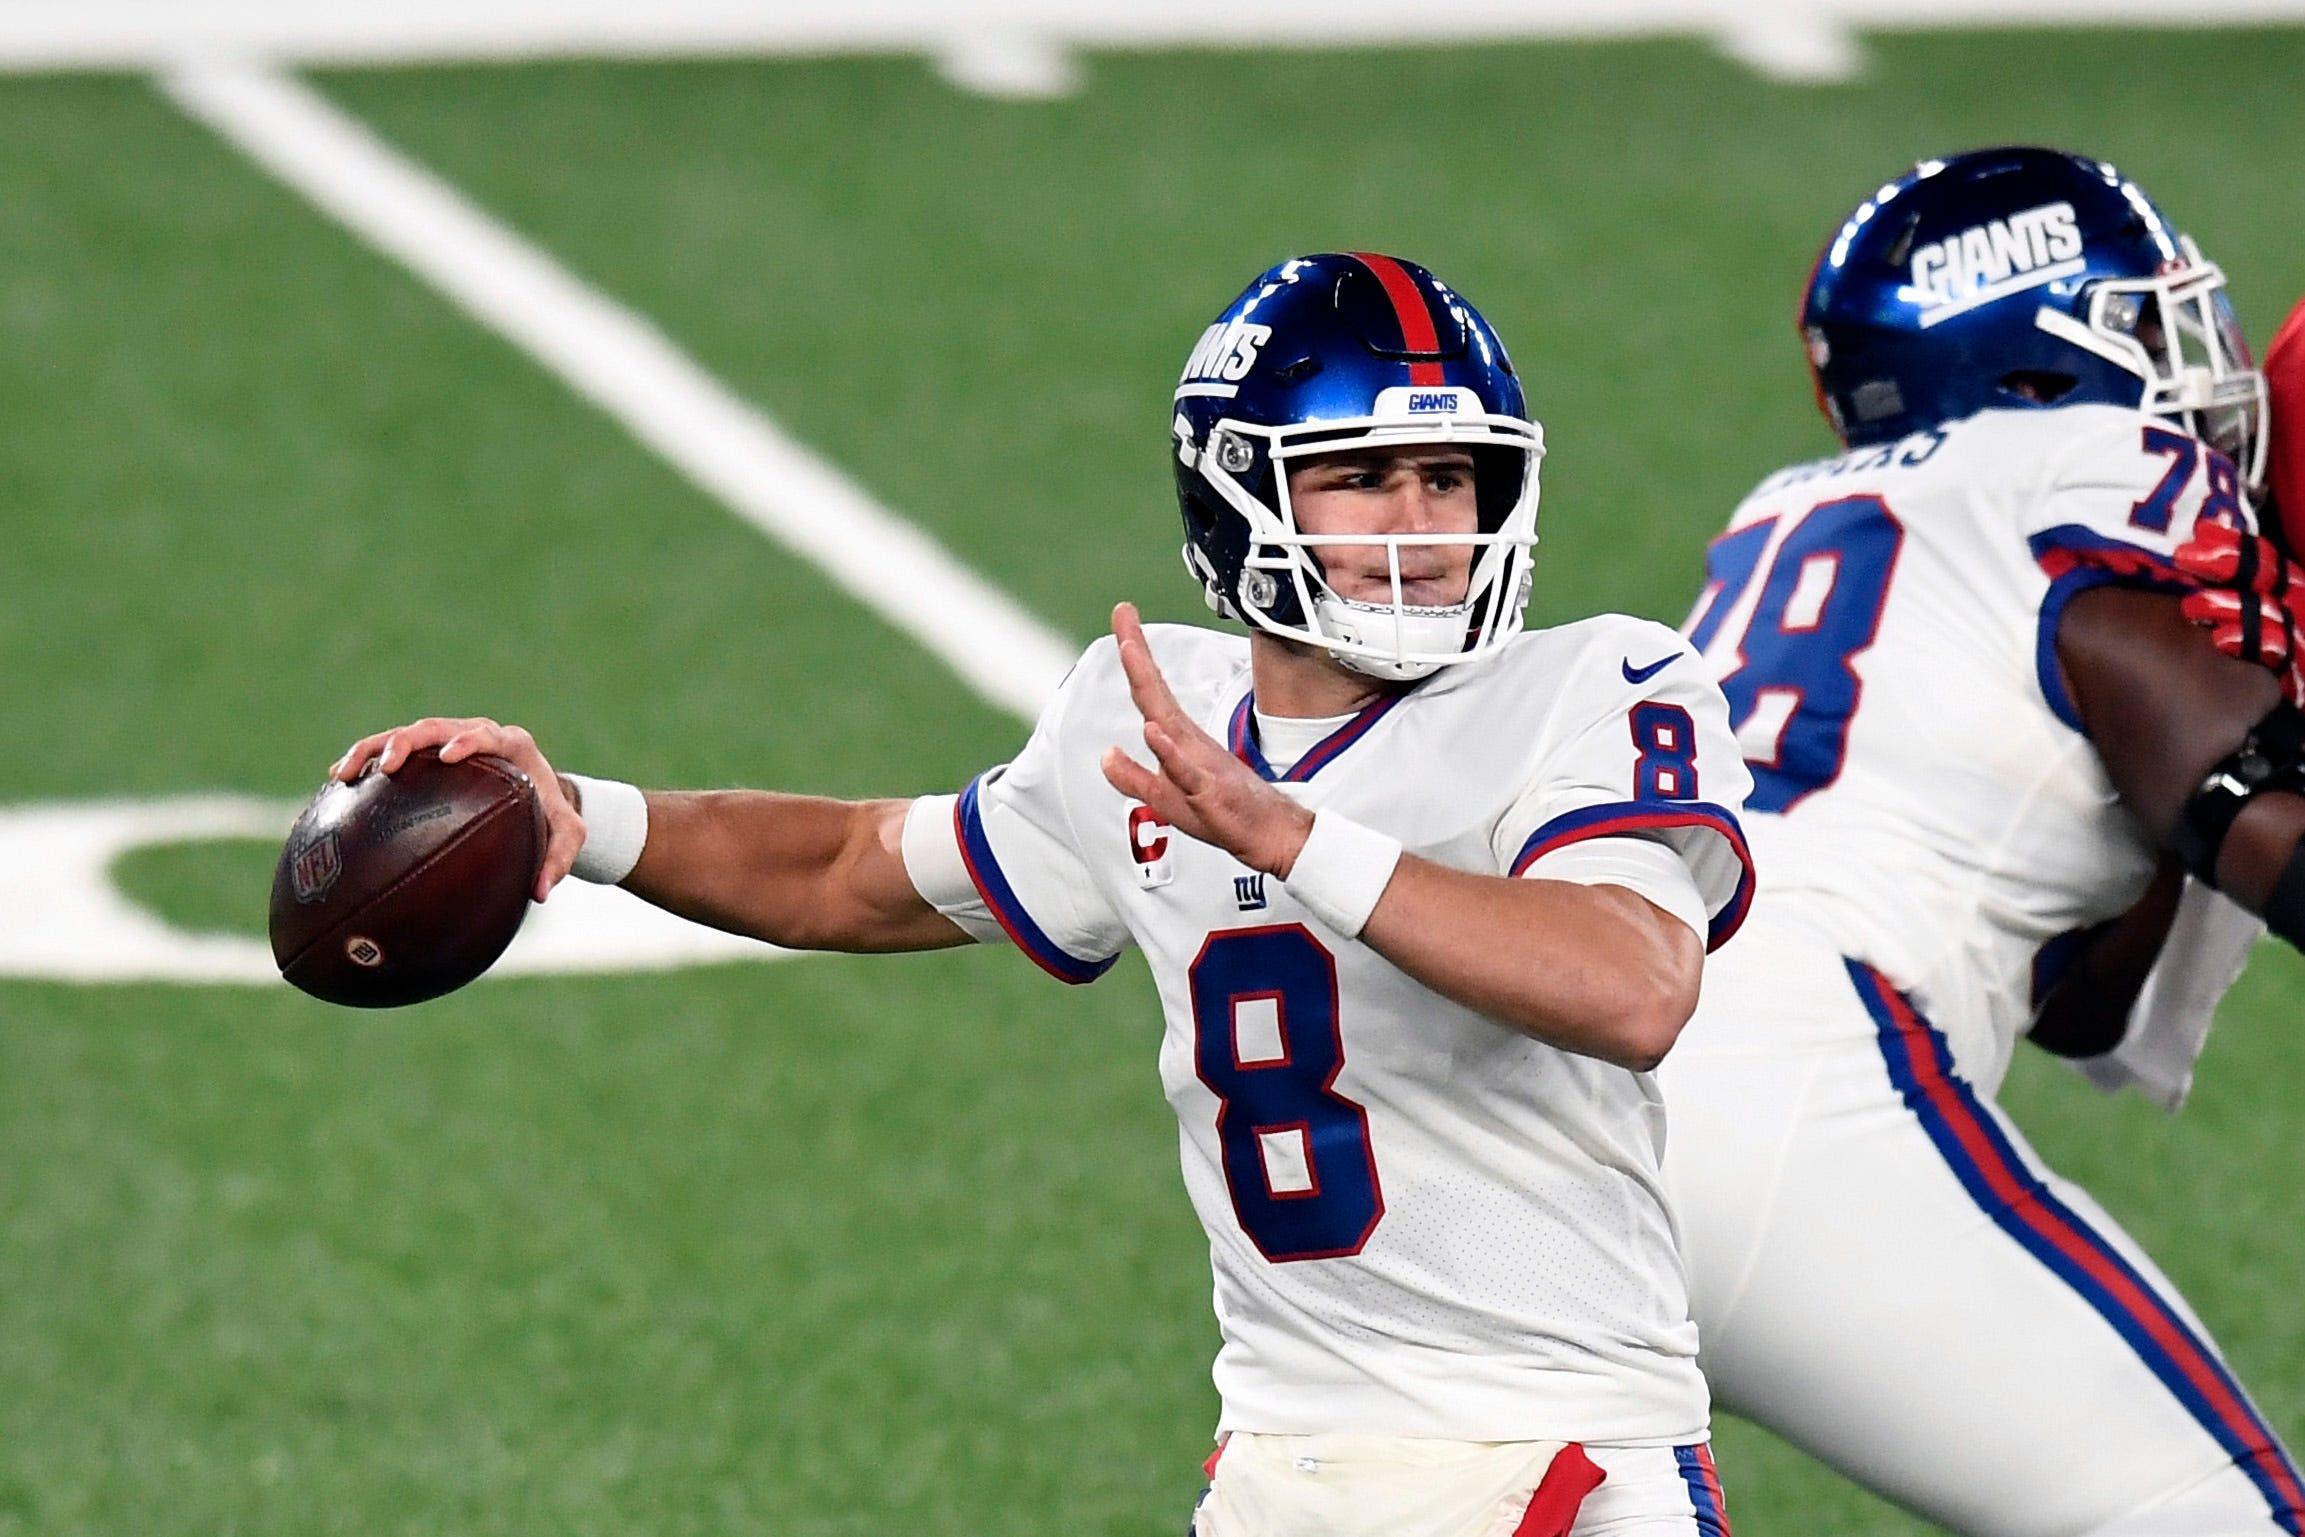 New York Giants quarterback Daniel Jones (8) throws against the Tampa Bay Buccaneers in the first half of an NFL game at MetLife Stadium on Monday, Nov. 2, 2020, in East Rutherford. / © Danielle Parhizkaran/NorthJersey via Imagn Content Services, LLC